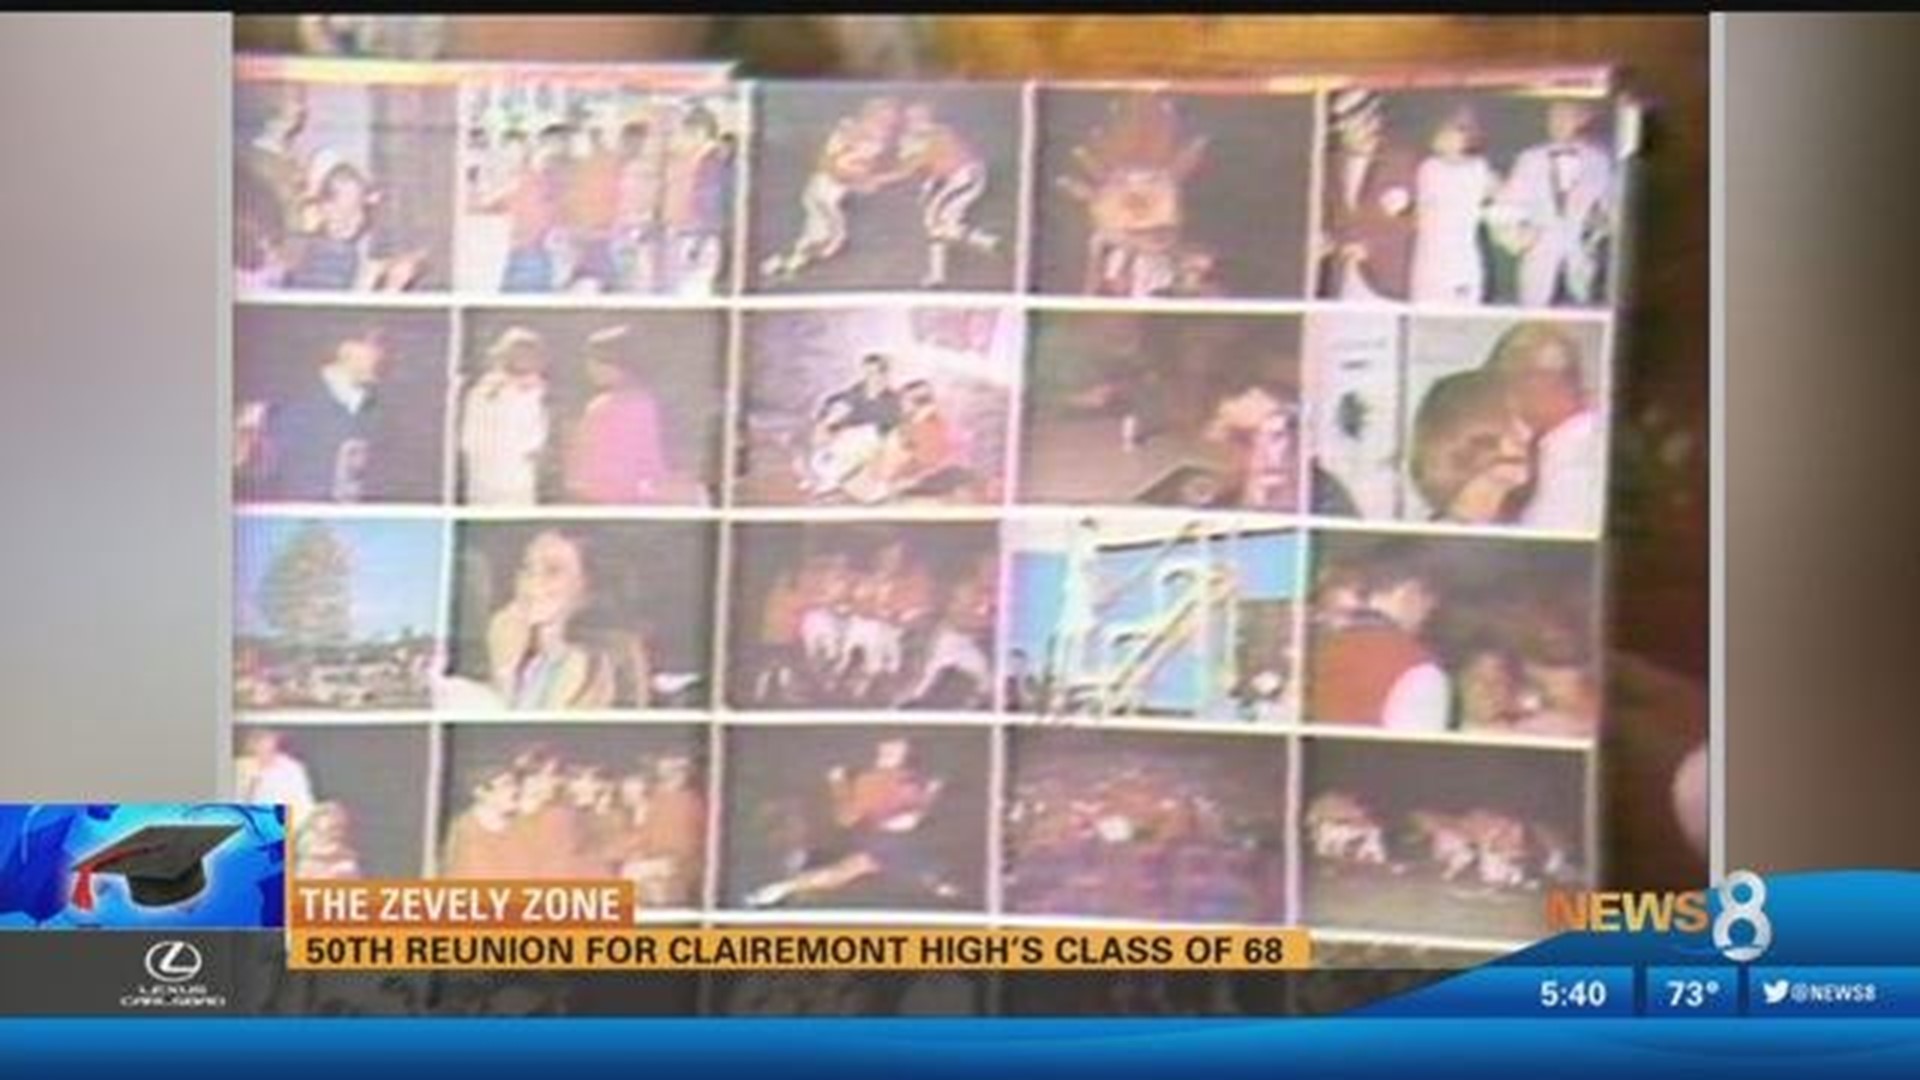 Aired on 9/3/2018: Clairemont High School's class of 1968 50th reunion.